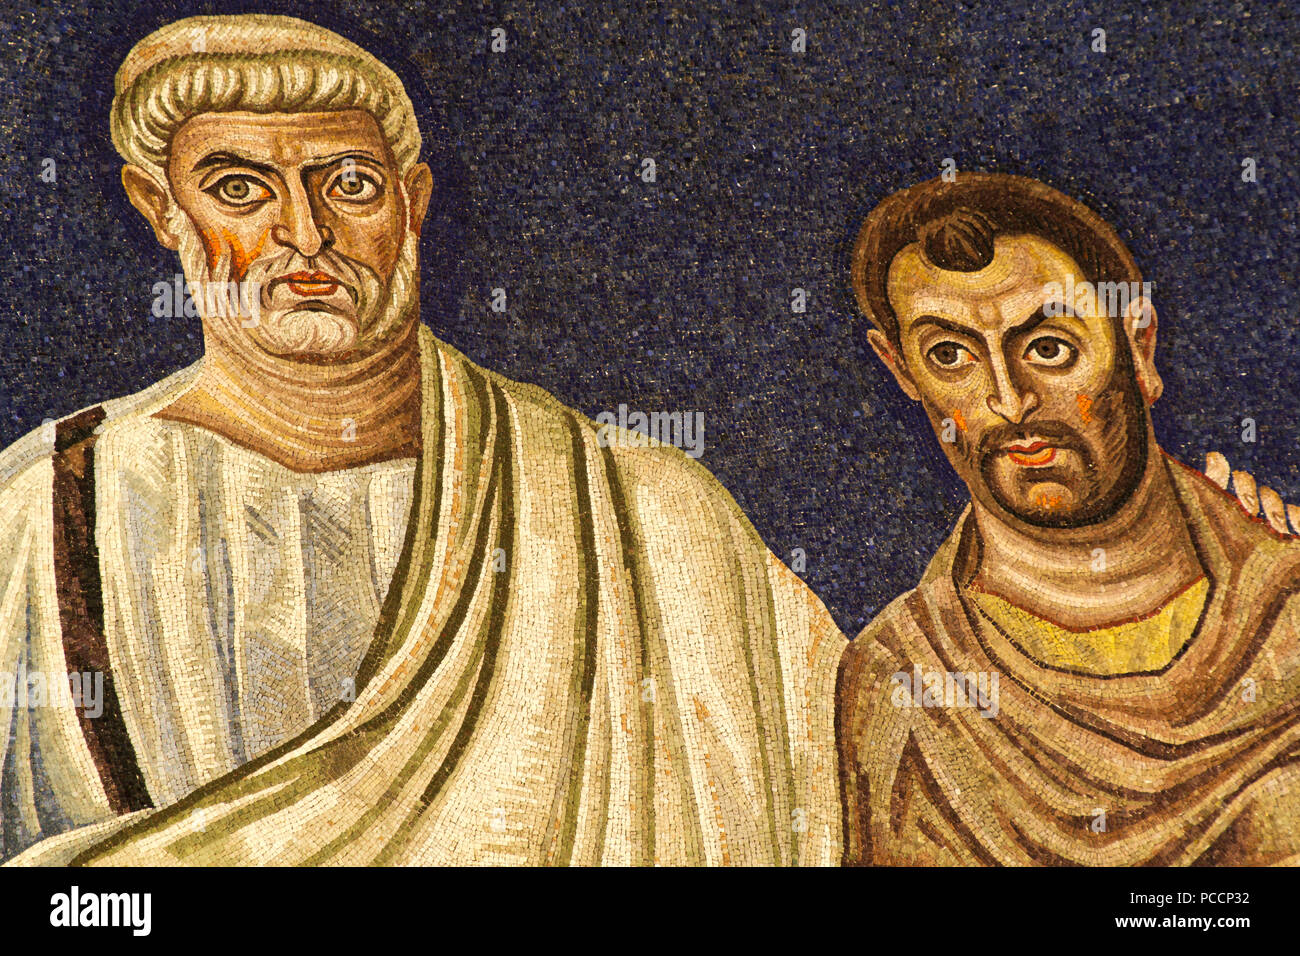 St Peter presenting St Cosmas - Detail of the 6th century apse mosaic (530 AC), Masterpiece of the early Christian Art, Basilica of SS Cosma e Damiano Stock Photo